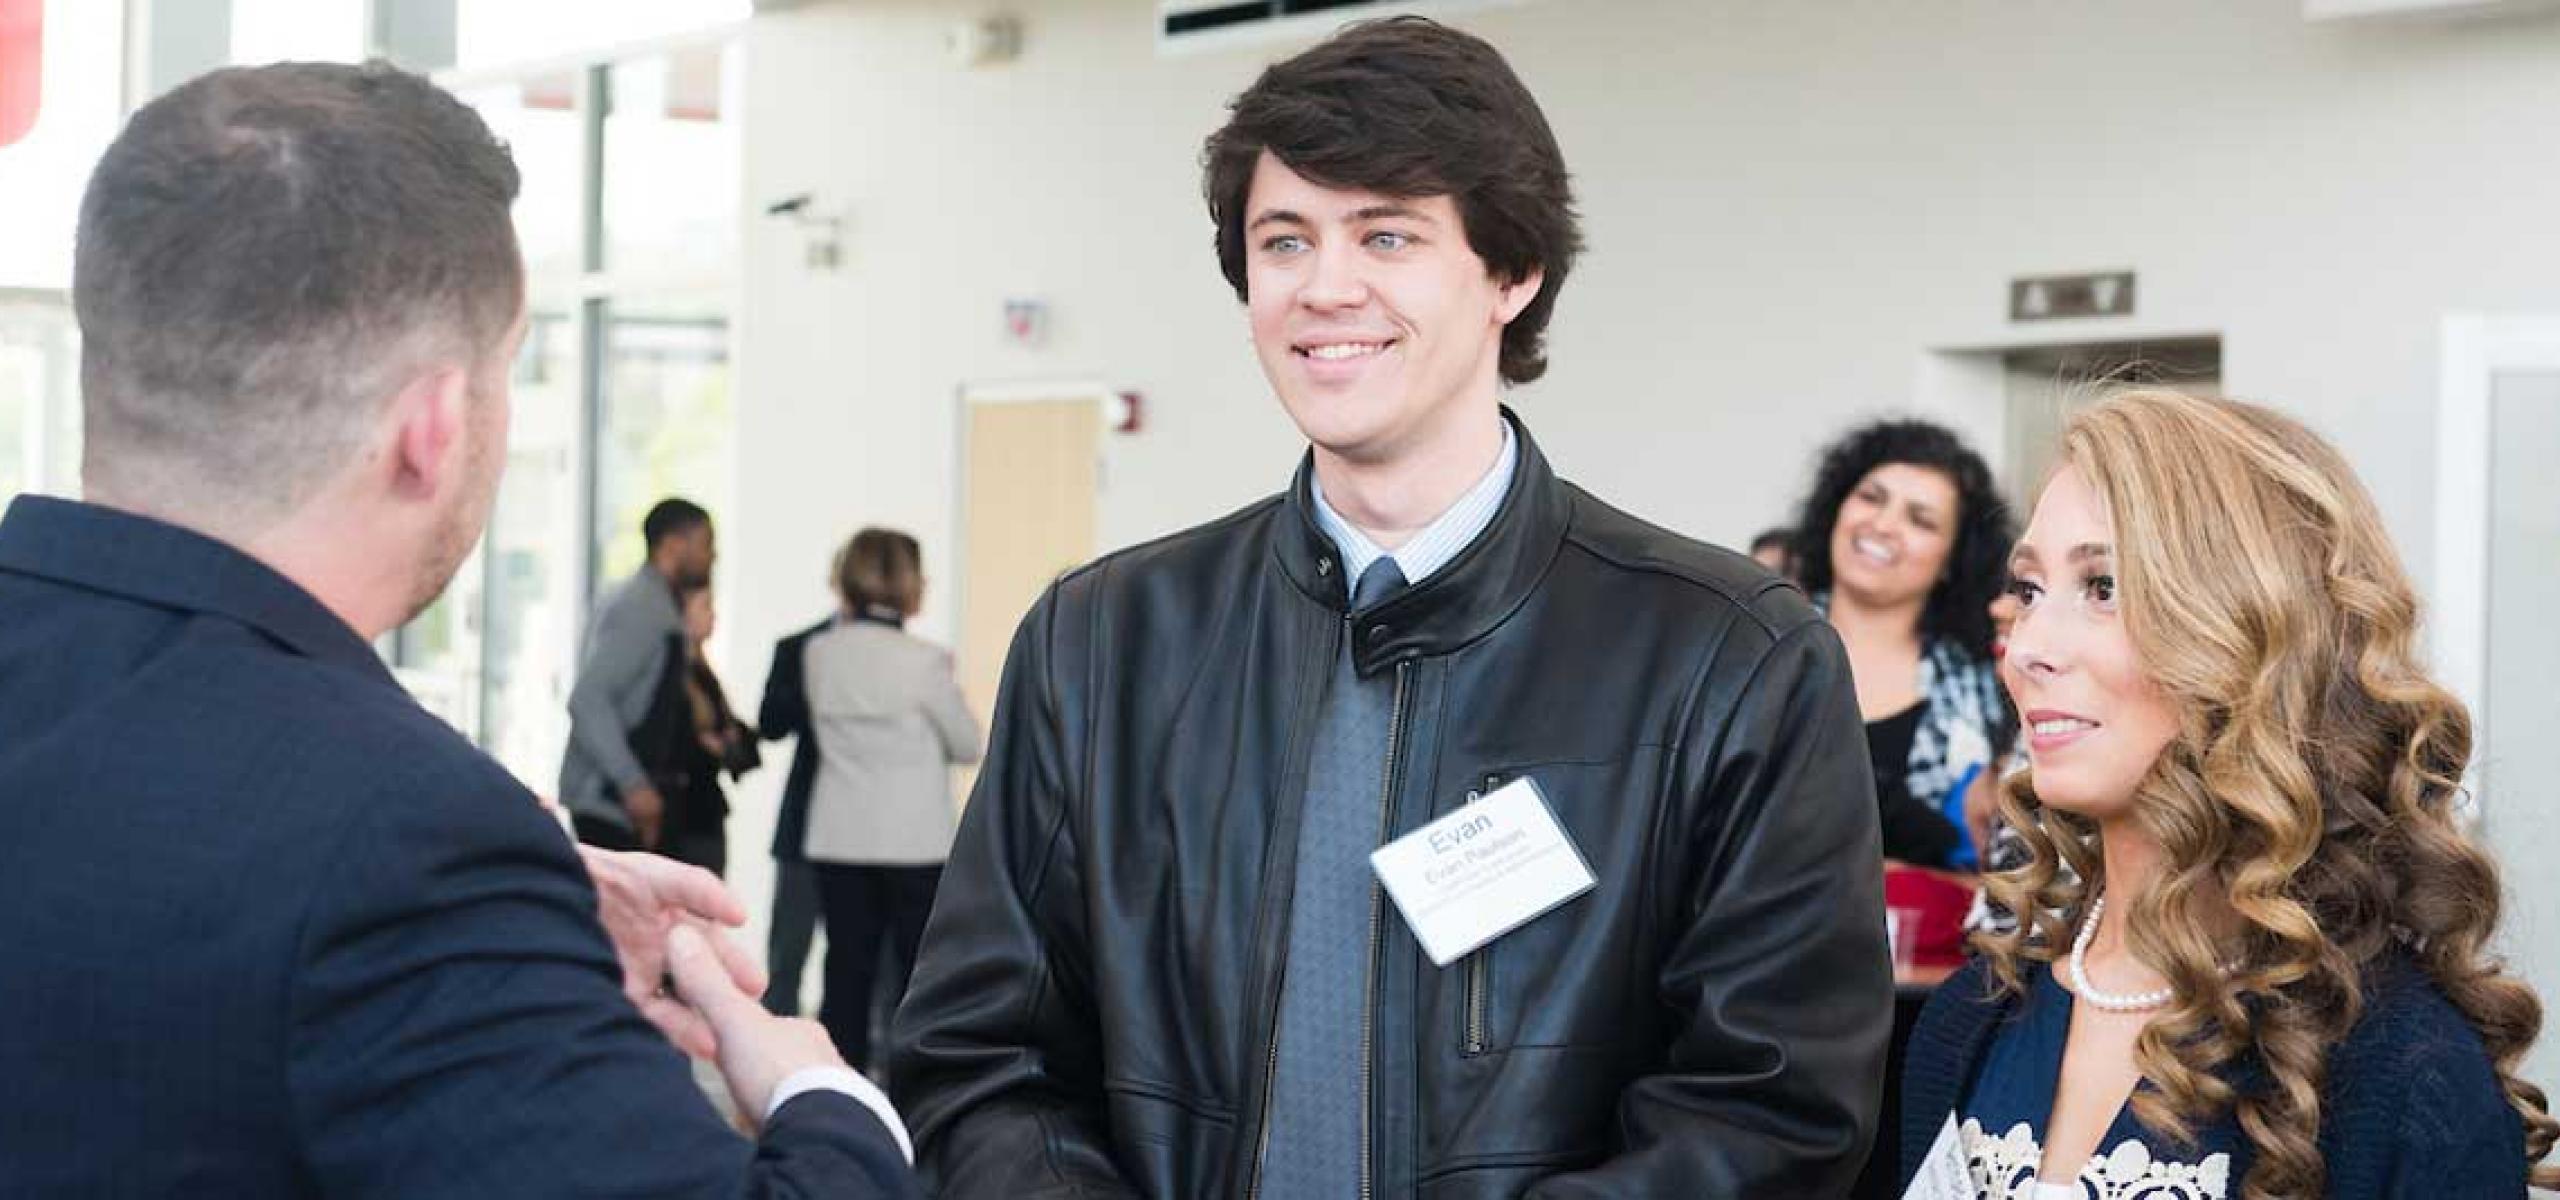 students, alumni and local professionals meet at networking event